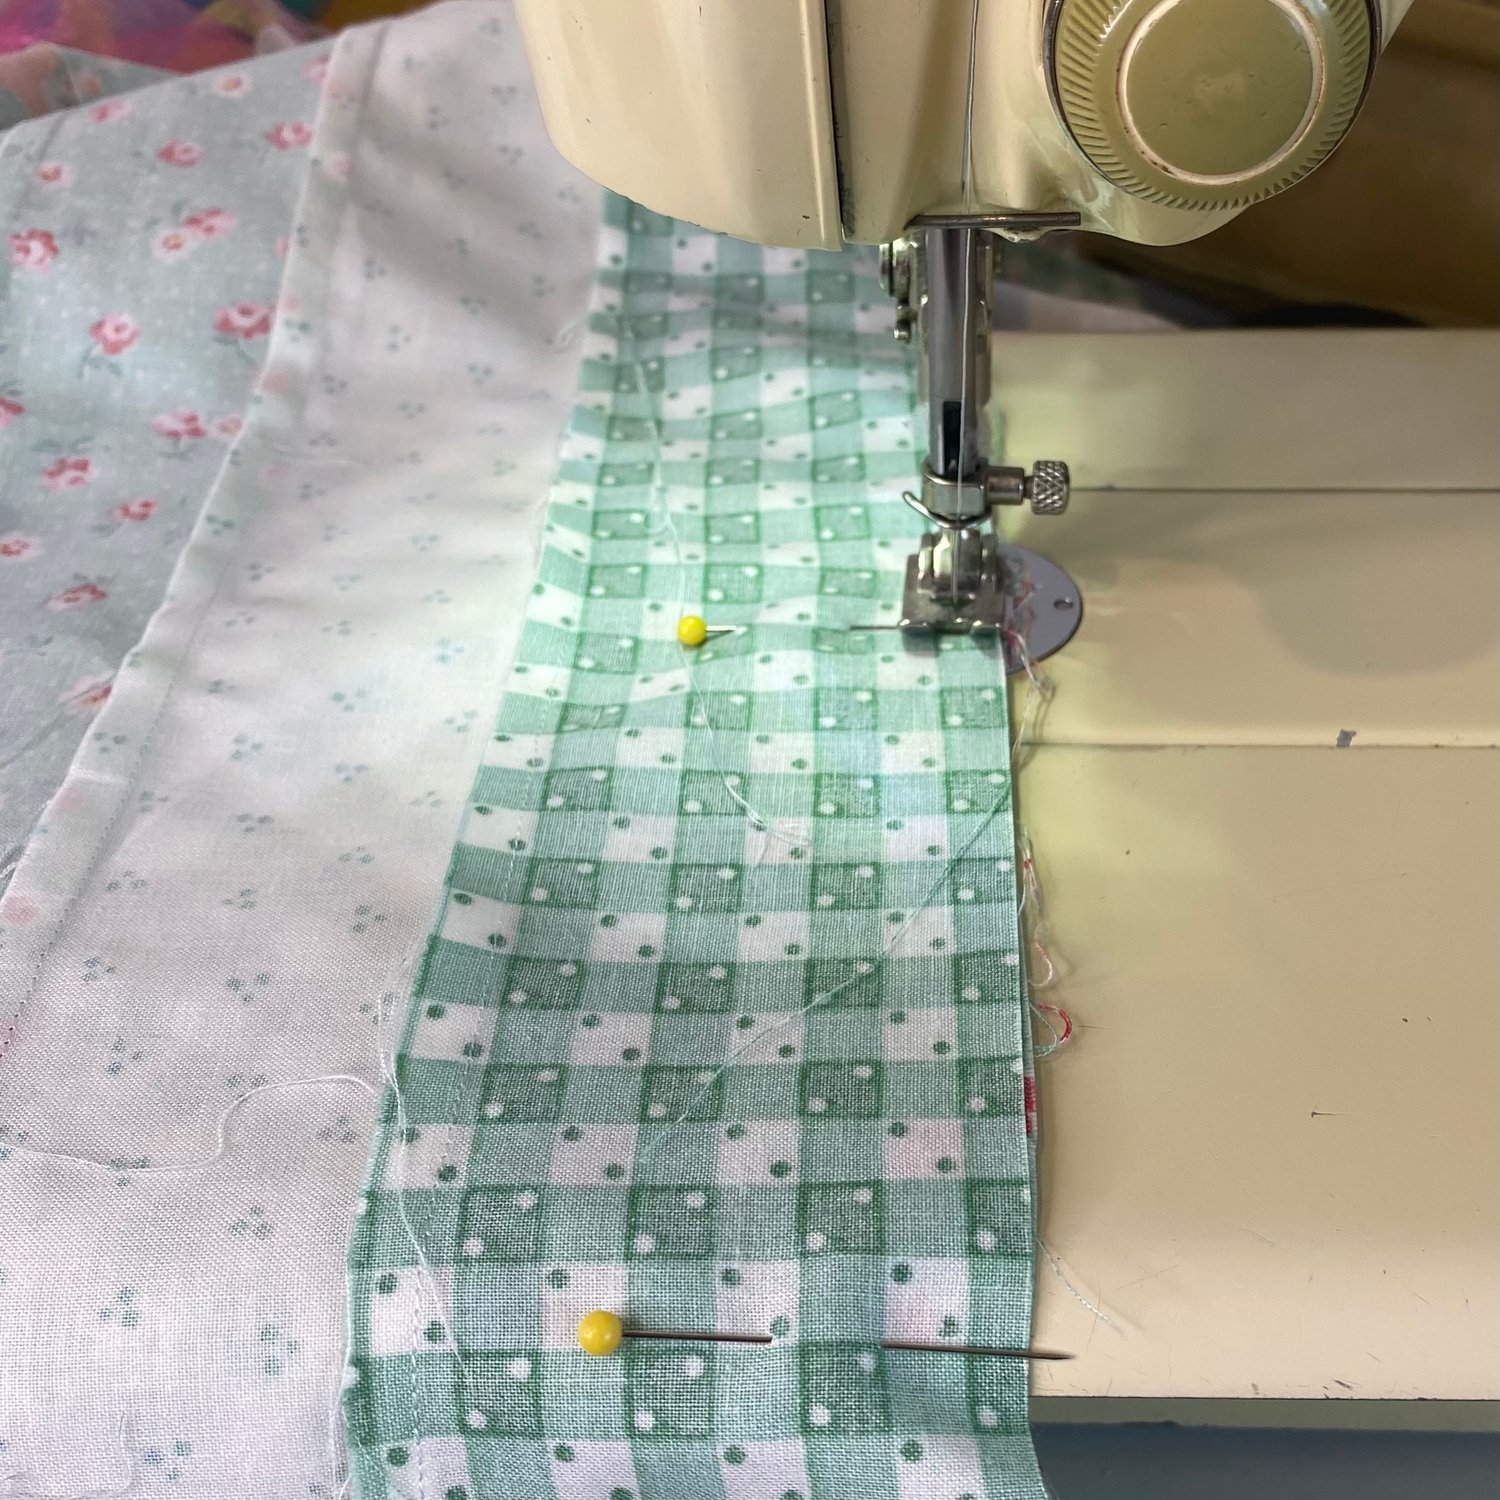 Tips for maintaining a quarter inch seam allowance even when you don’t have a 1/4” quilting foot for your sewing machine. Picture shows an antique sewing machine sewing a 1/4” seam allowance on a modern quilt.